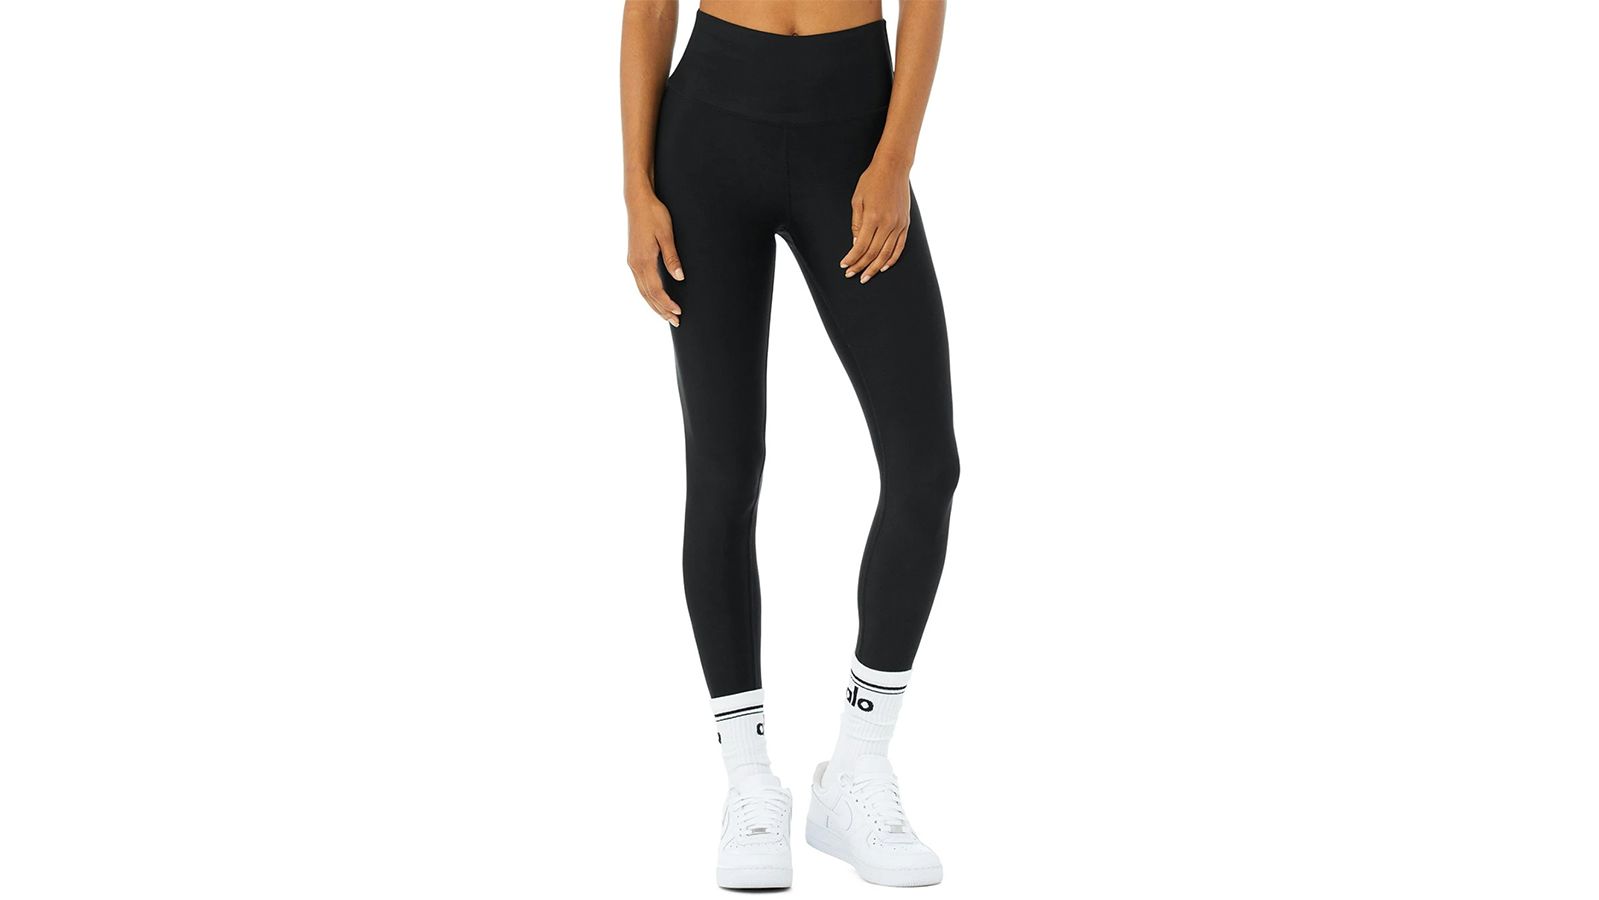 Unisex Throwback Sock - Black/White  Alo yoga outfit, Cute nike outfits, Alo  yoga clothes